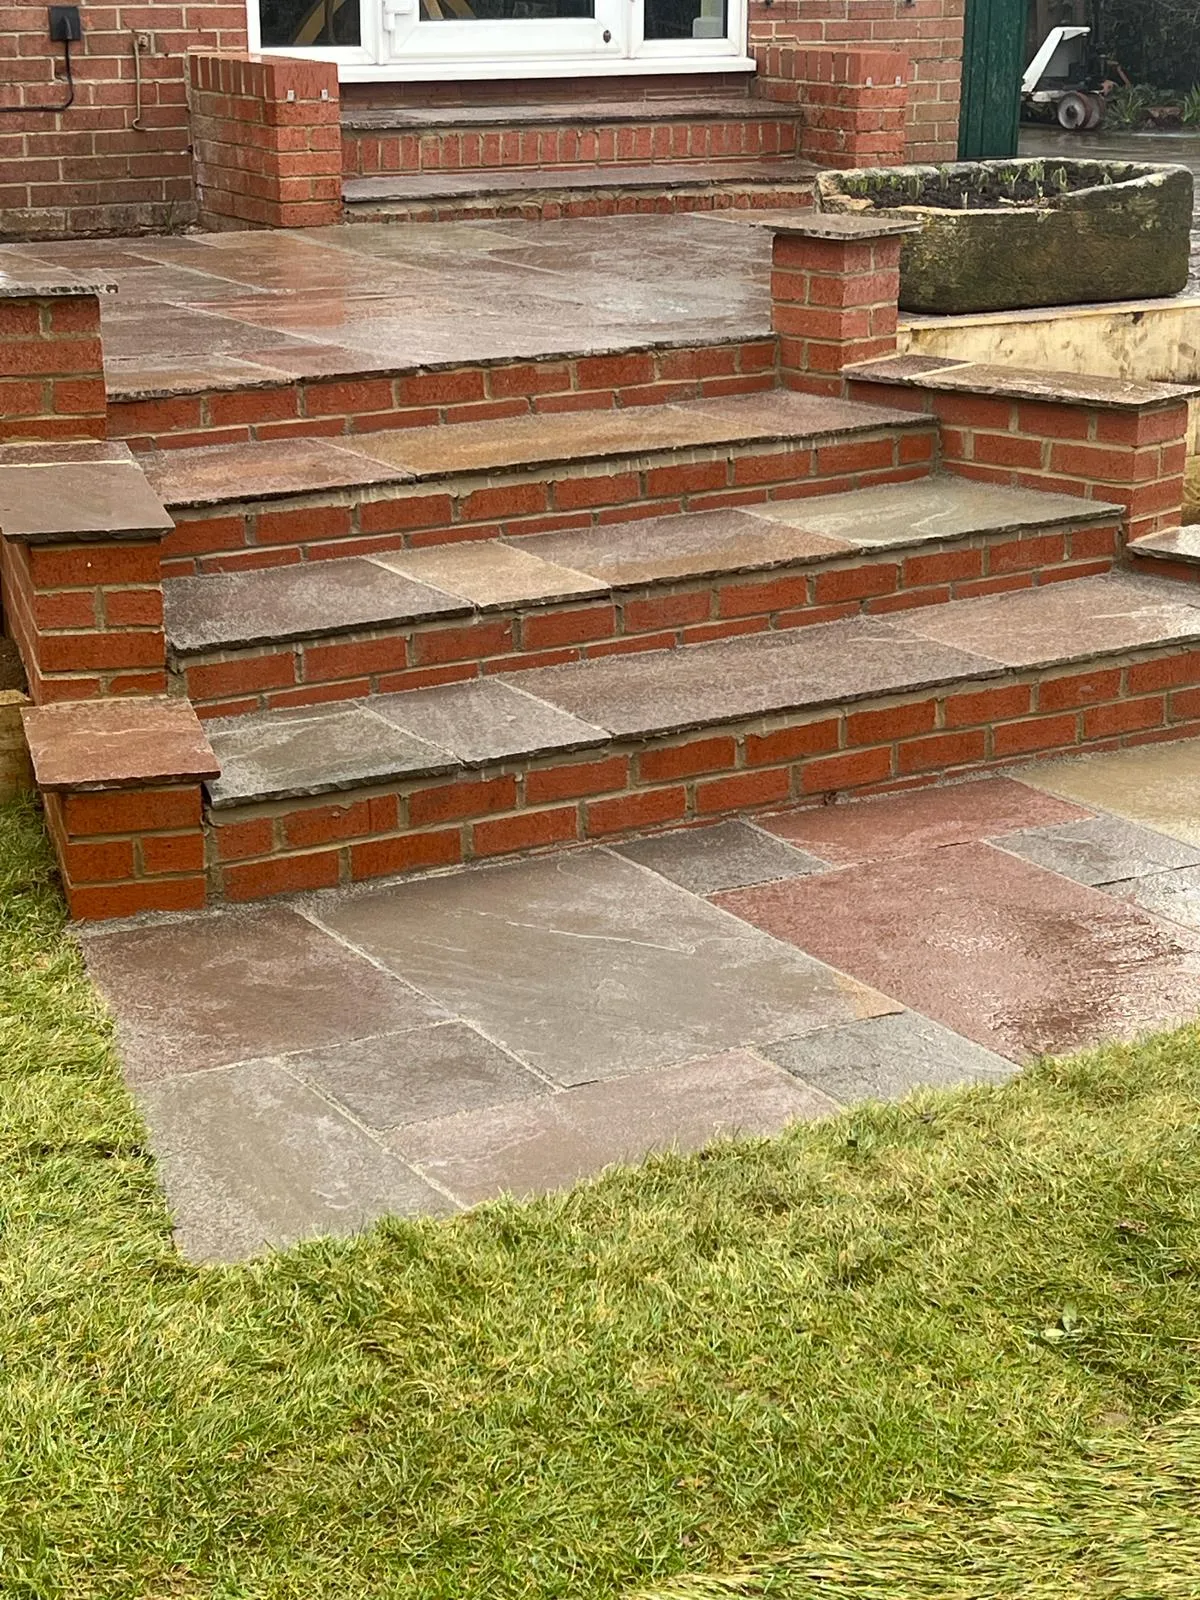 A brick patio with steps leading up to a door.